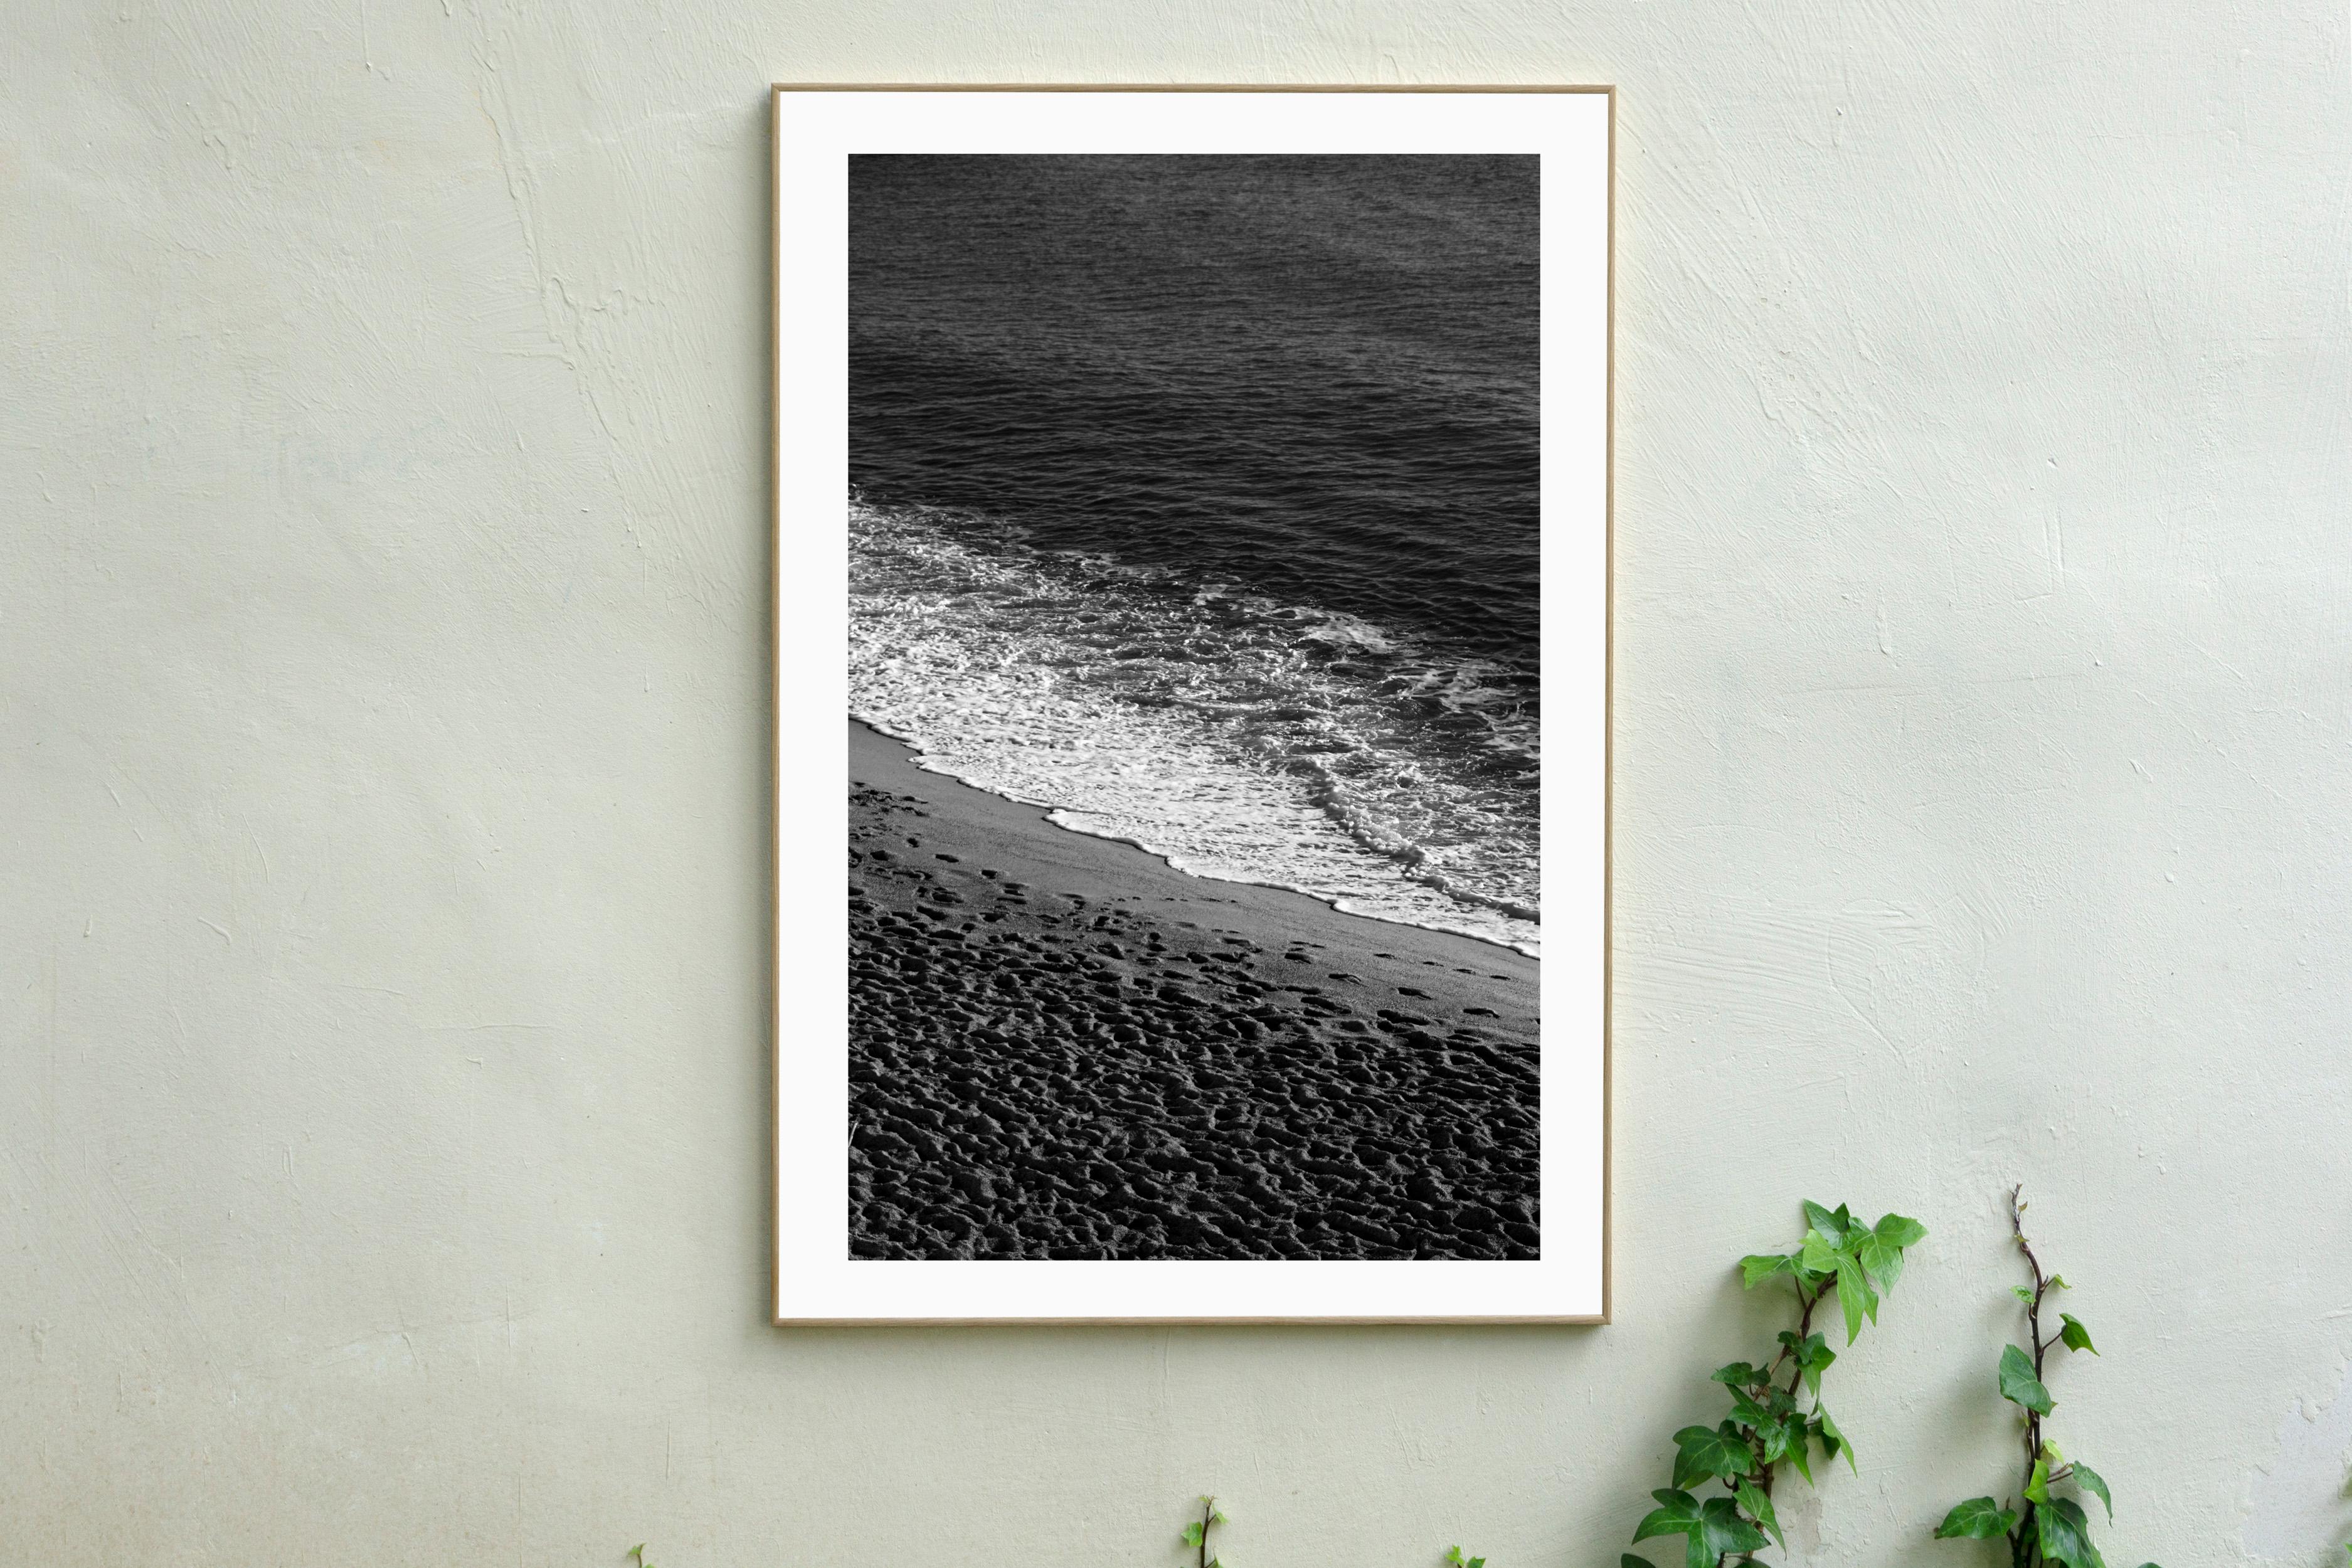 Black and White Giclée Print of Sandy Shore with Foam, Coastal Black and White  - Photograph by Kind of Cyan